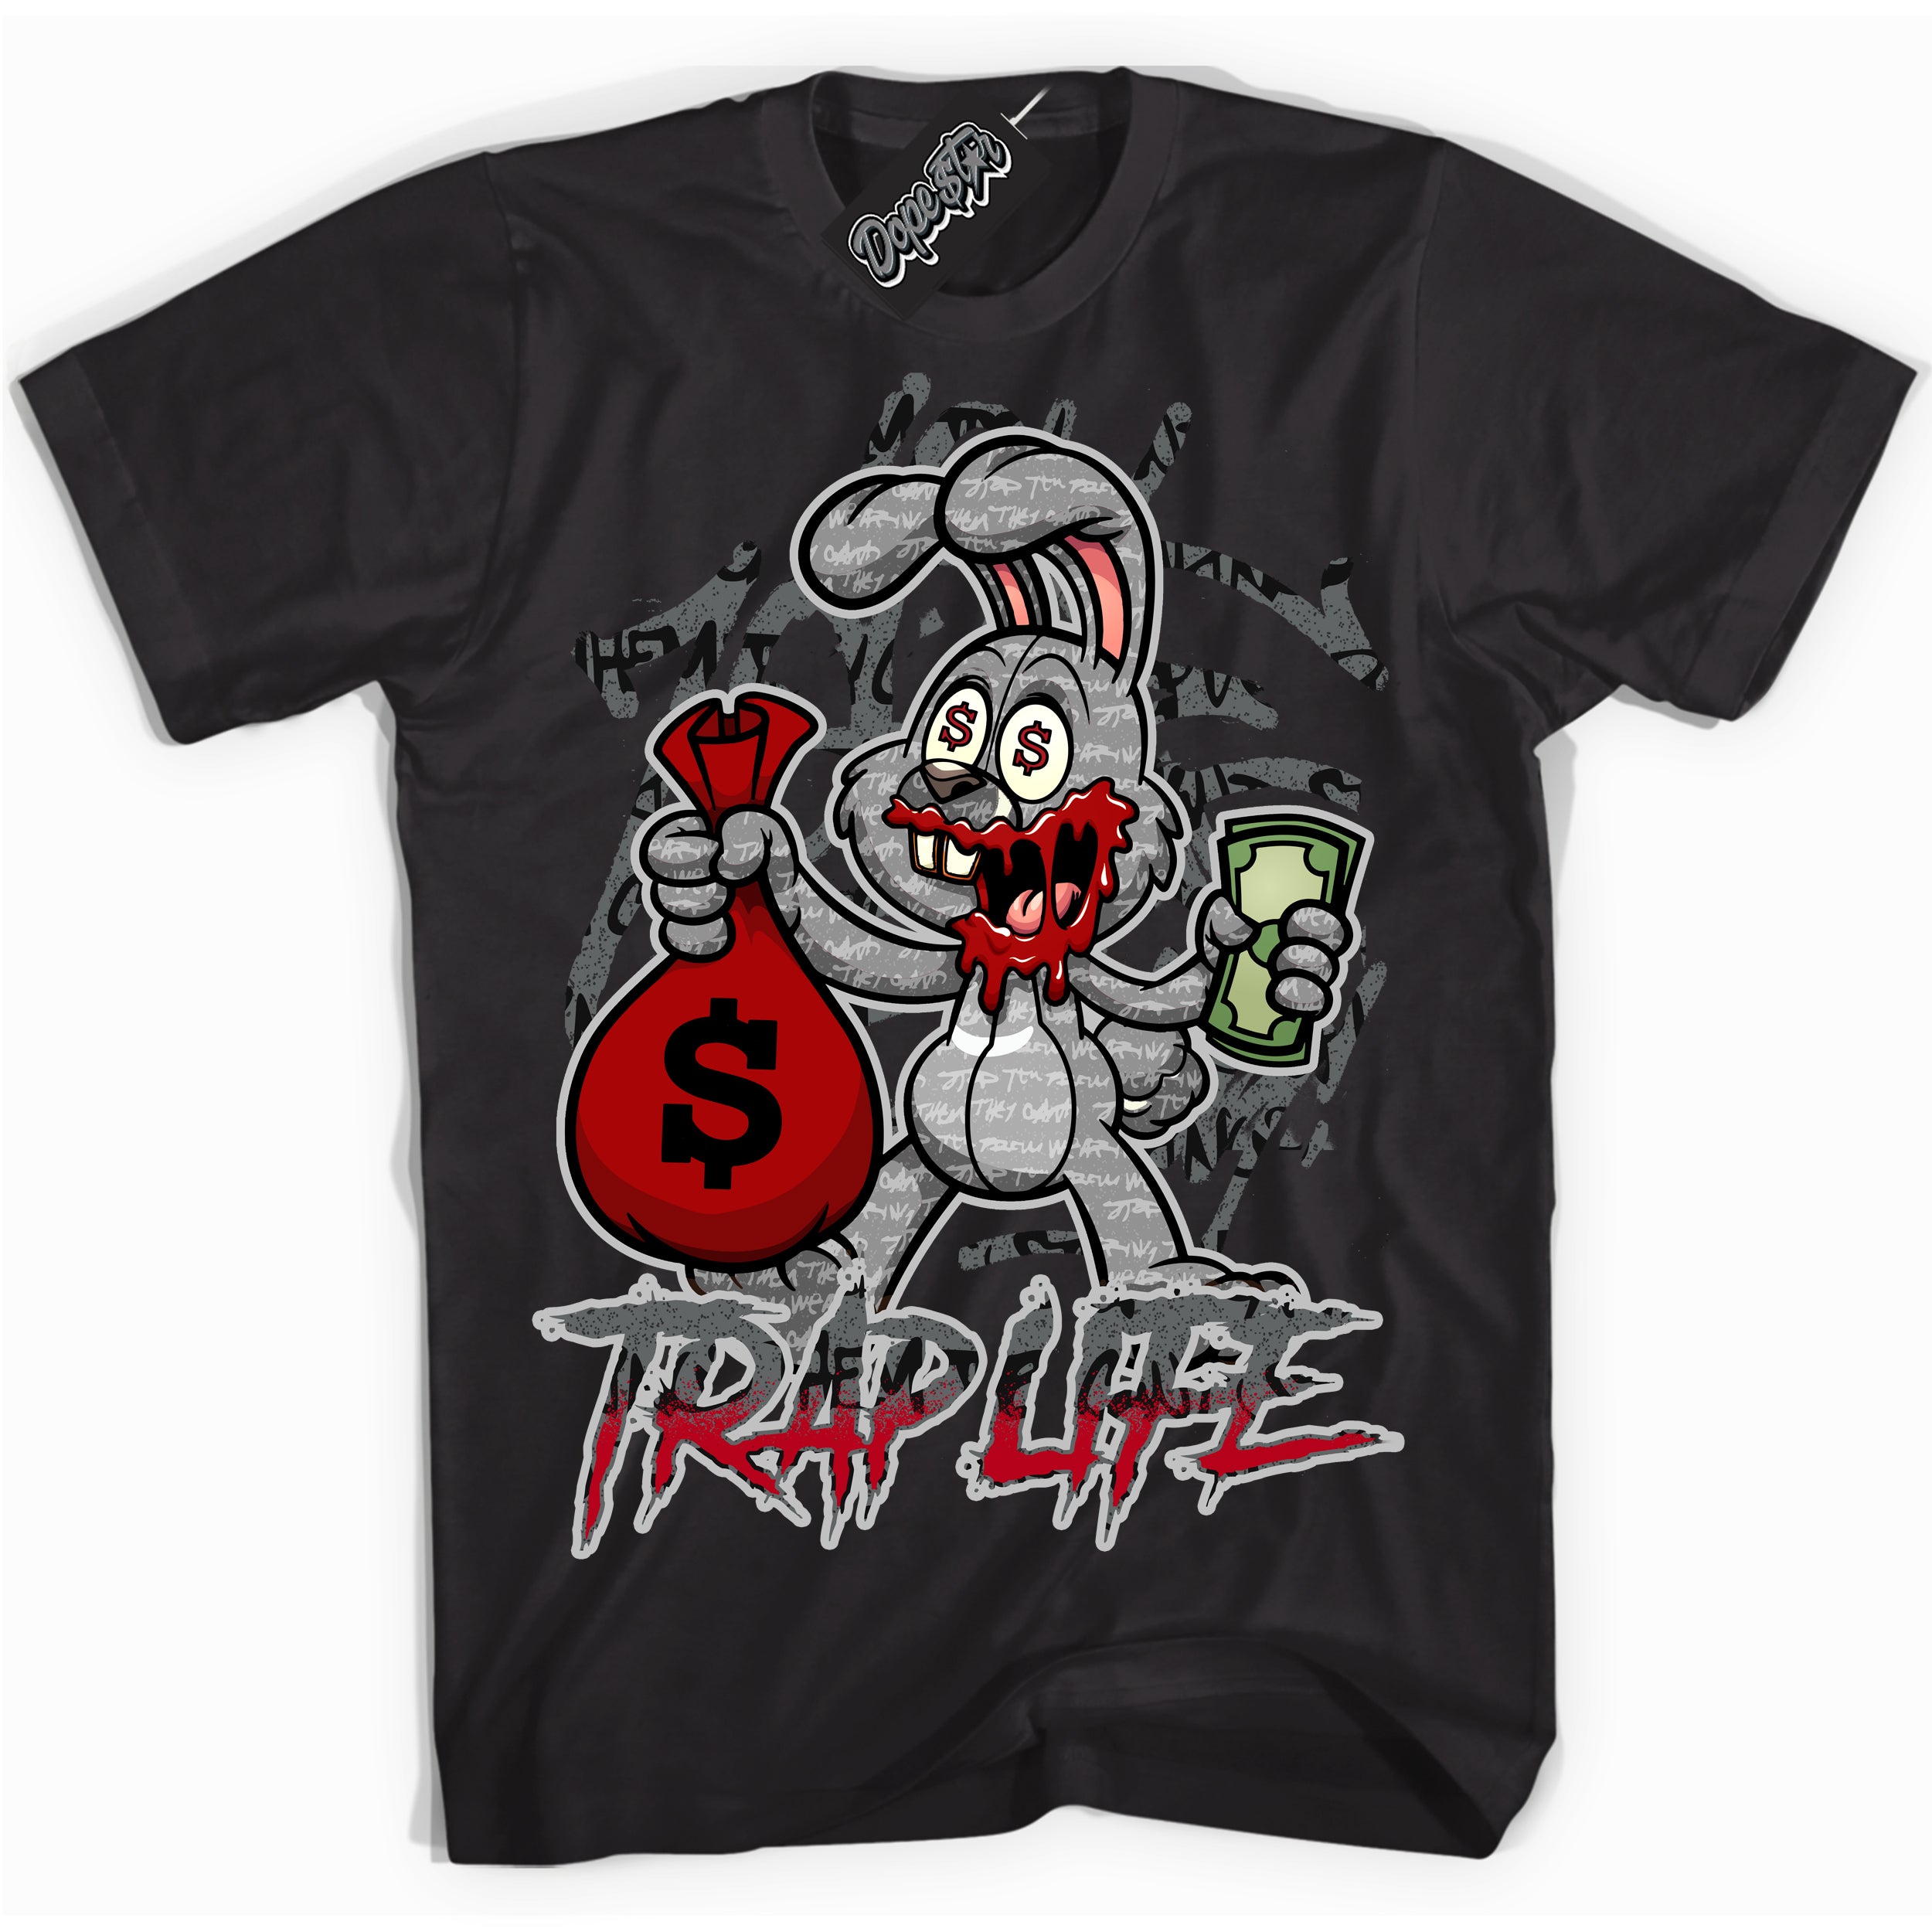 Cool Black Shirt with “ Trap Rabbit ” design that perfectly matches Rebellionaire 1s Sneakers.